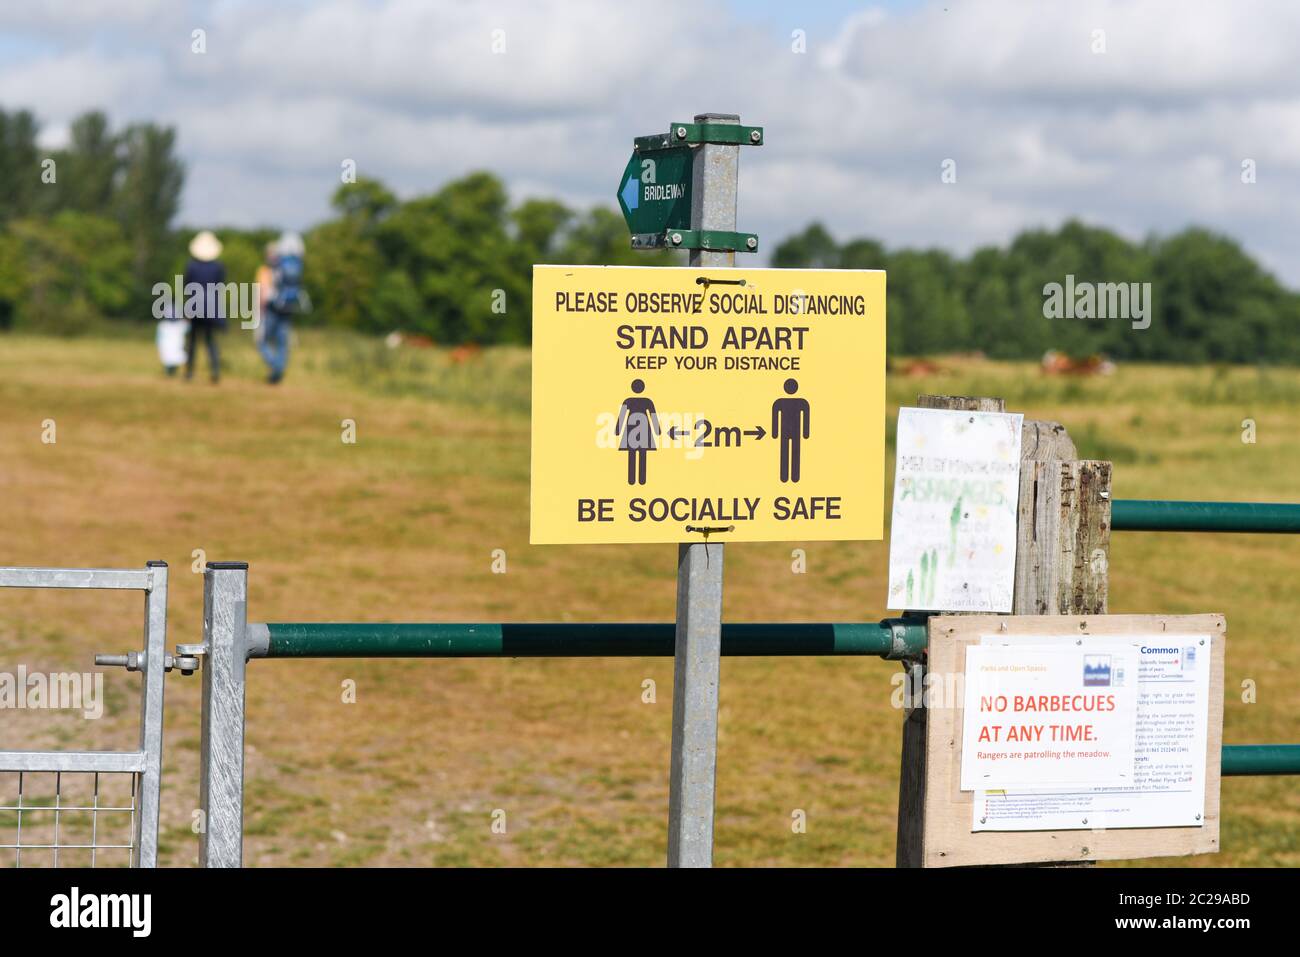 A sign telling walkers and people to keep 2m apart while relaxing and walking in public parks in the UK Stock Photo